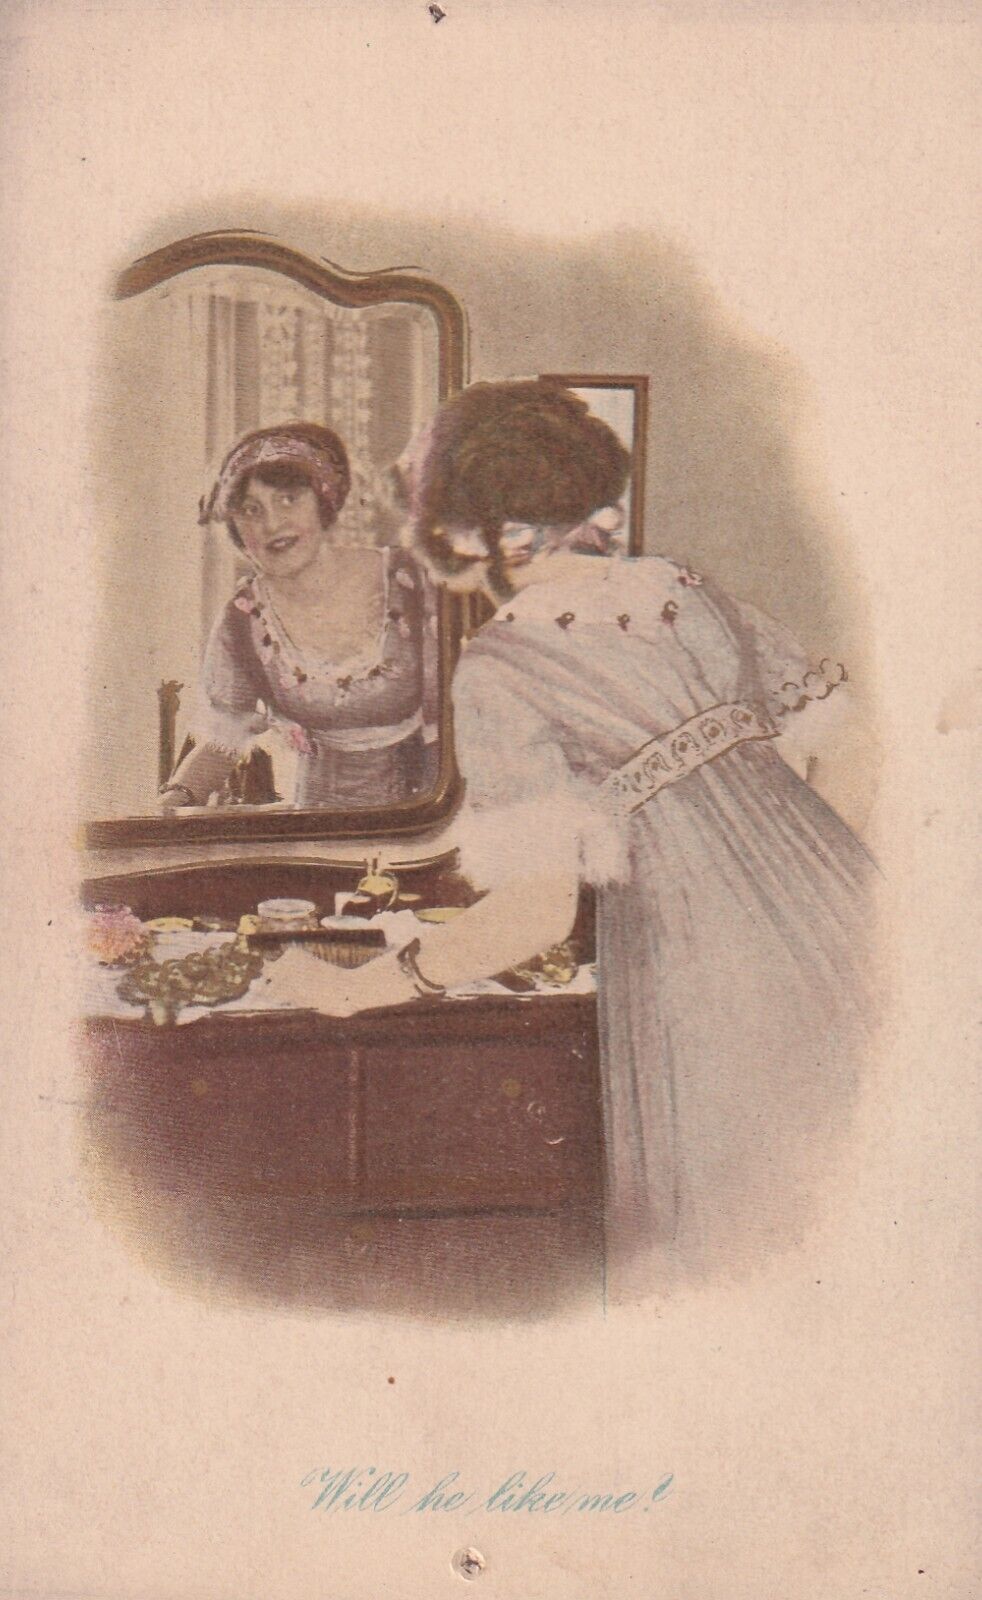 VTG Postcard Antique 1907-15, Will He Like Me? Romance, Woman in Mirror